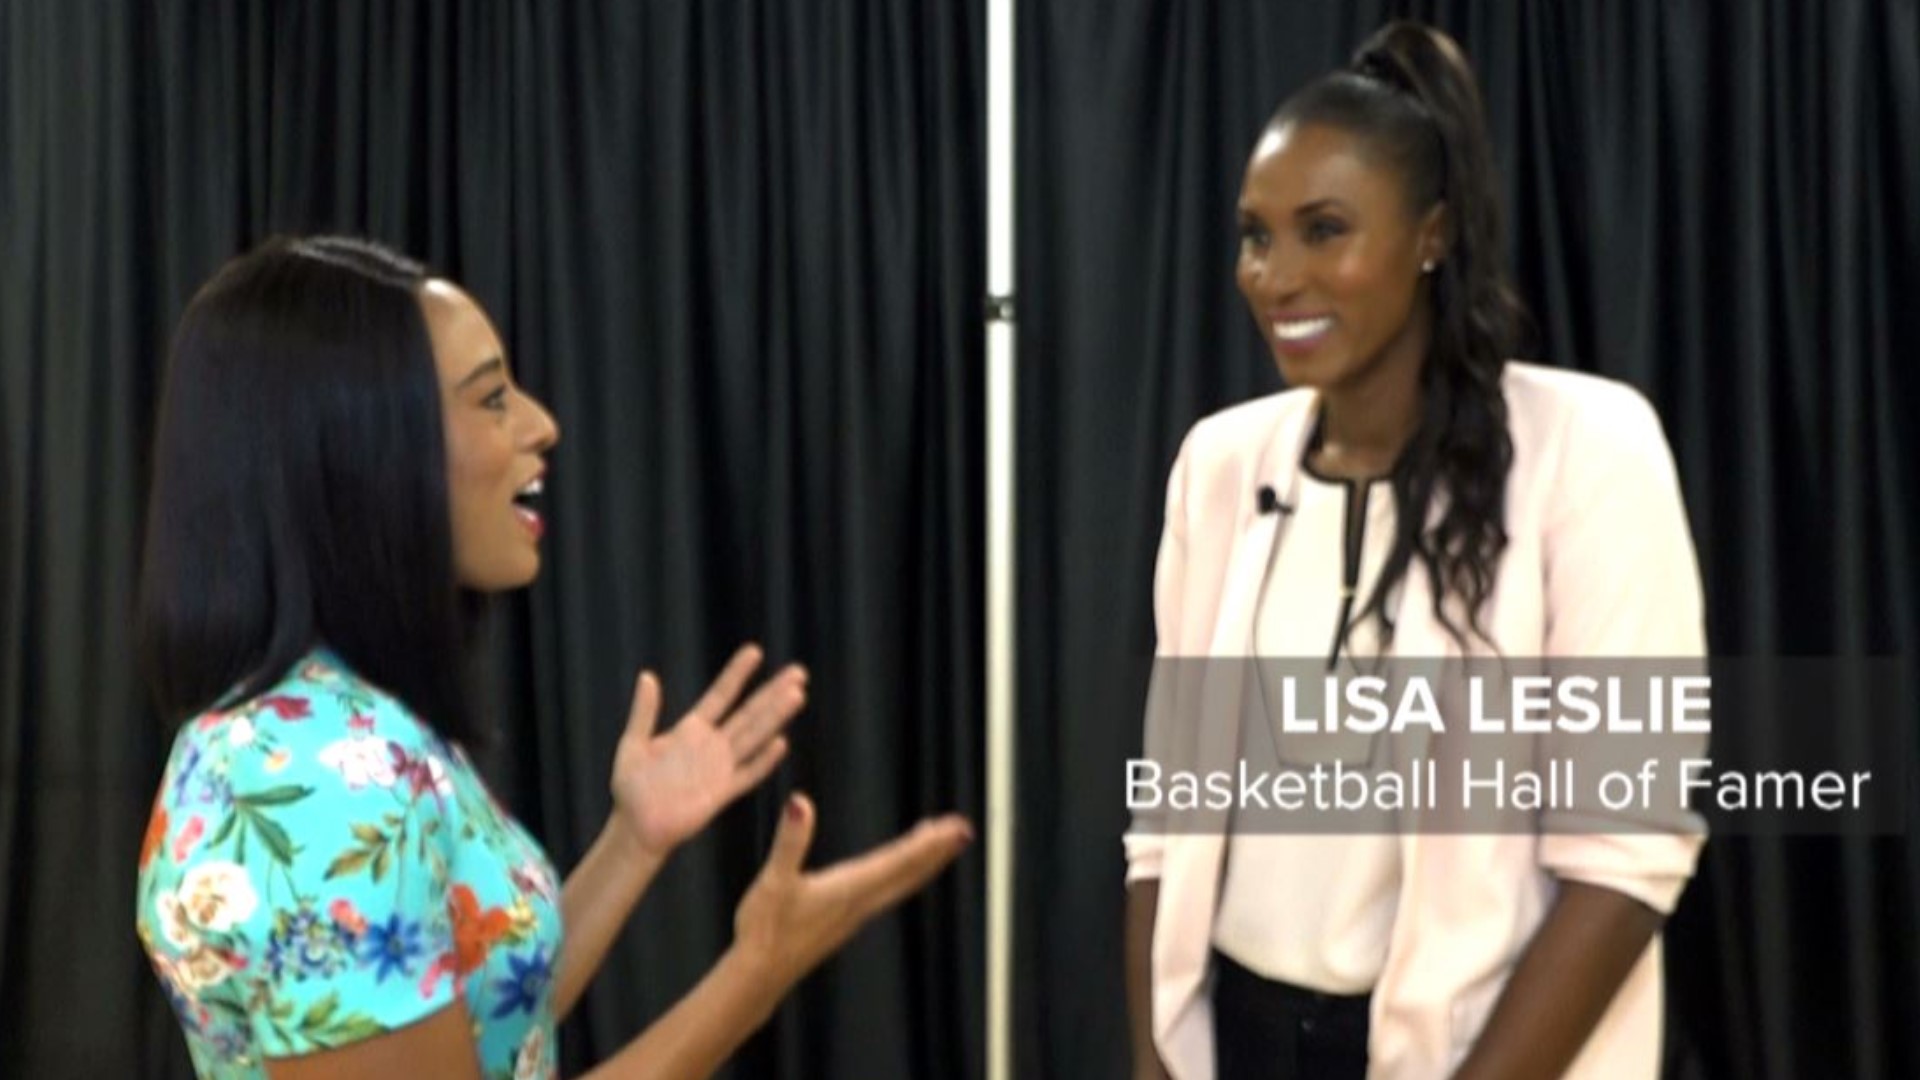 Students at Sacramento State were in the presence of a basketball legend as former WNBA star Lisa Leslie served as the keynote speaker for a special event.